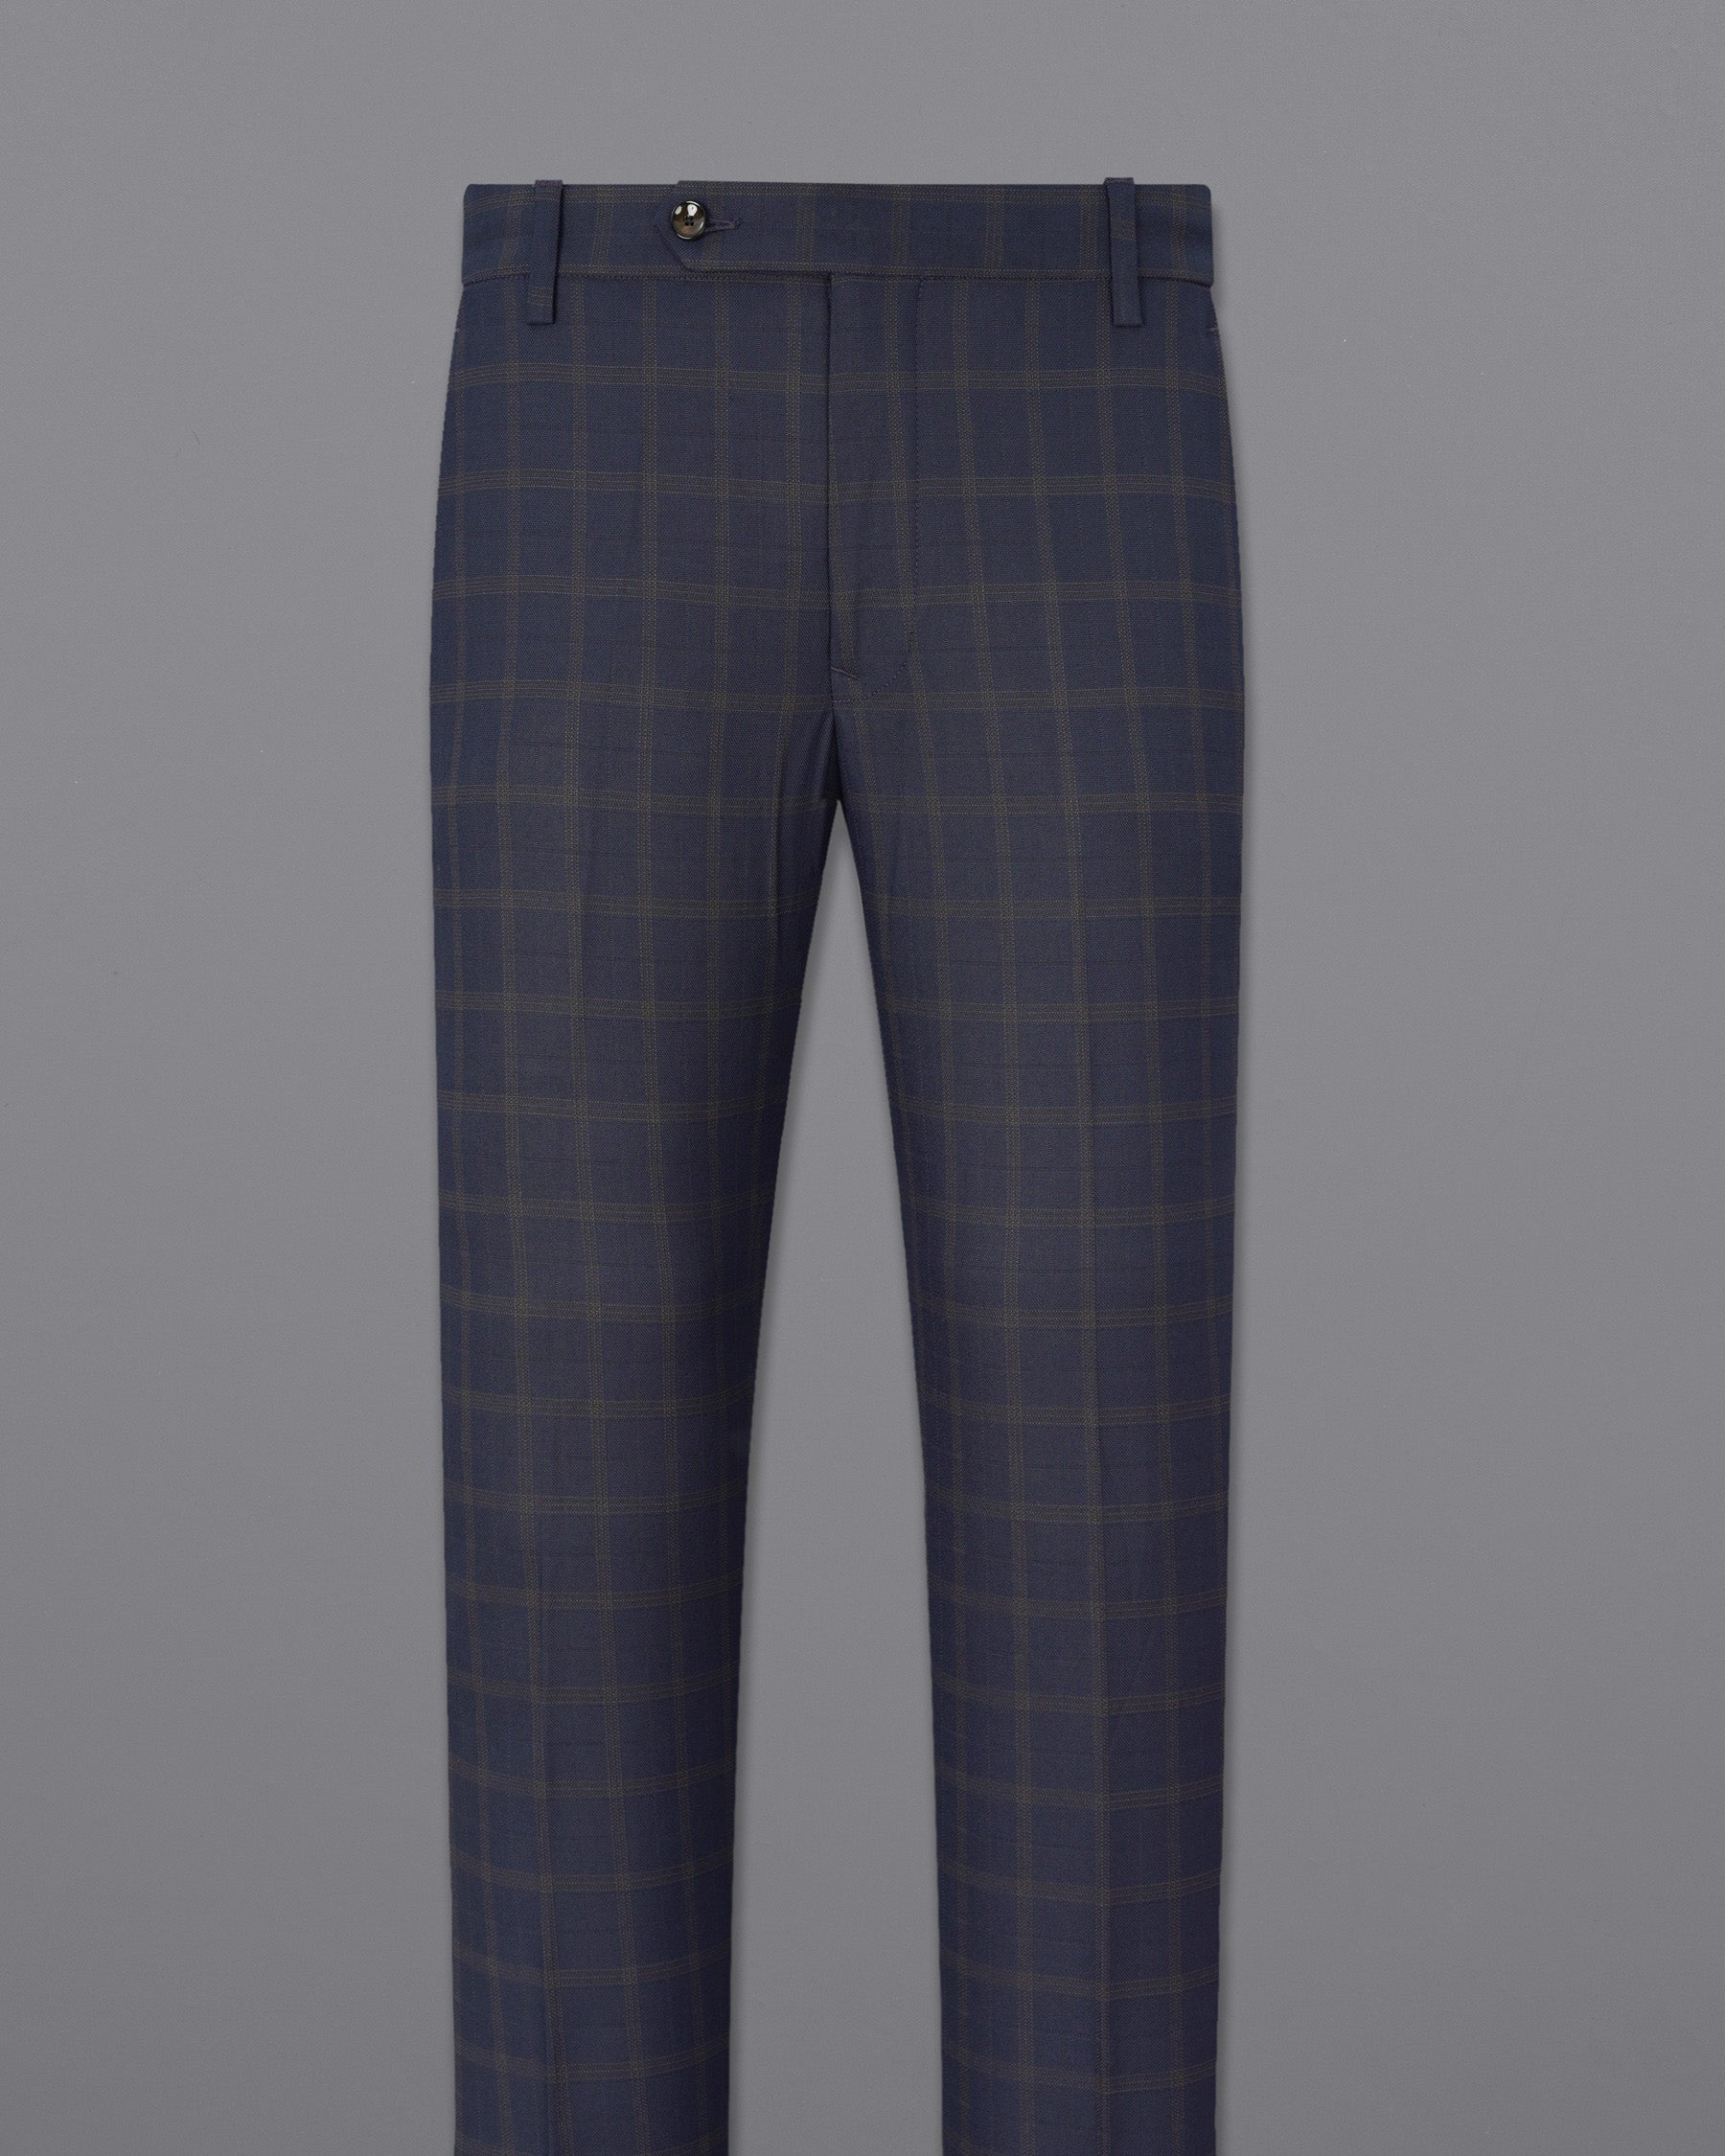 Gunmetal Blue windowpane Double Breasted Suit ST1892-DB-36, ST1892-DB-38, ST1892-DB-40, ST1892-DB-42, ST1892-DB-44, ST1892-DB-46, ST1892-DB-48, ST1892-DB-50, ST1892-DB-52, ST1892-DB-54, ST1892-DB-56, ST1892-DB-58, ST1892-DB-60